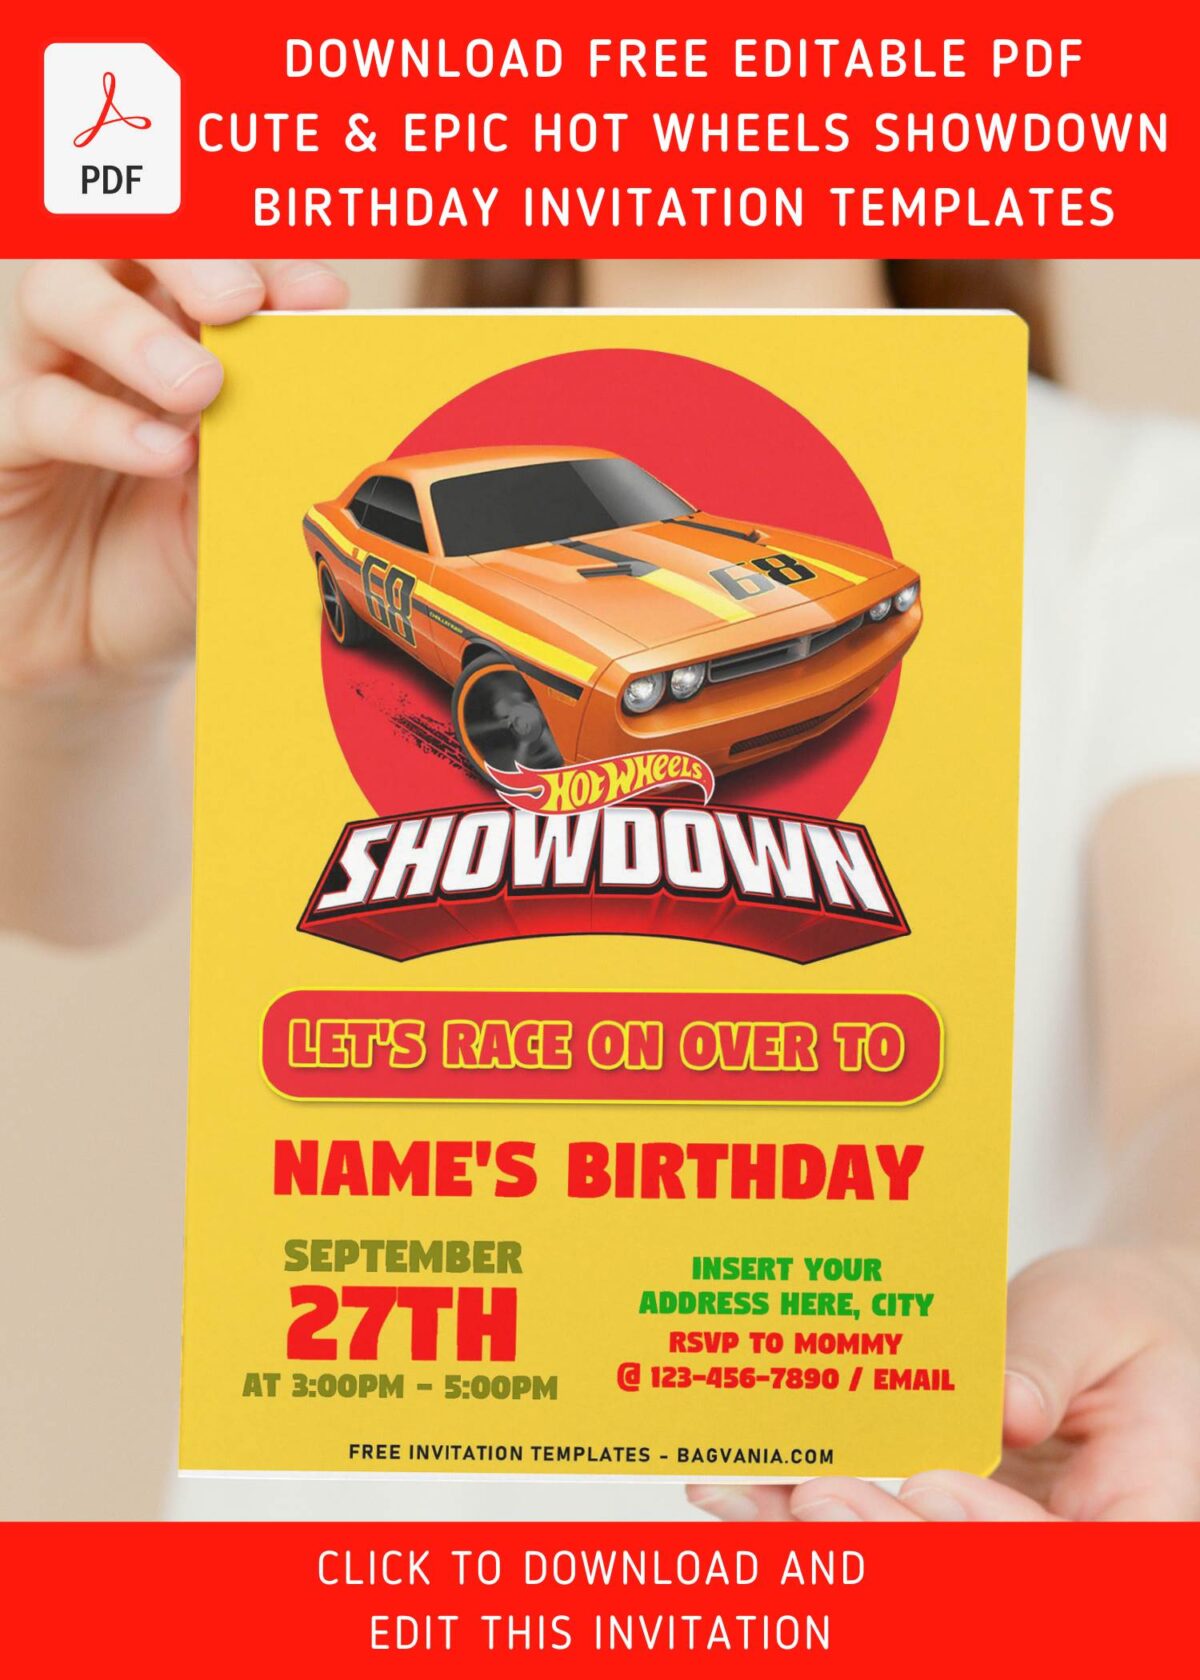 (Free Editable PDF) Race With The Winner Hot Wheels Birthday Invitation Templates with bright yellow background